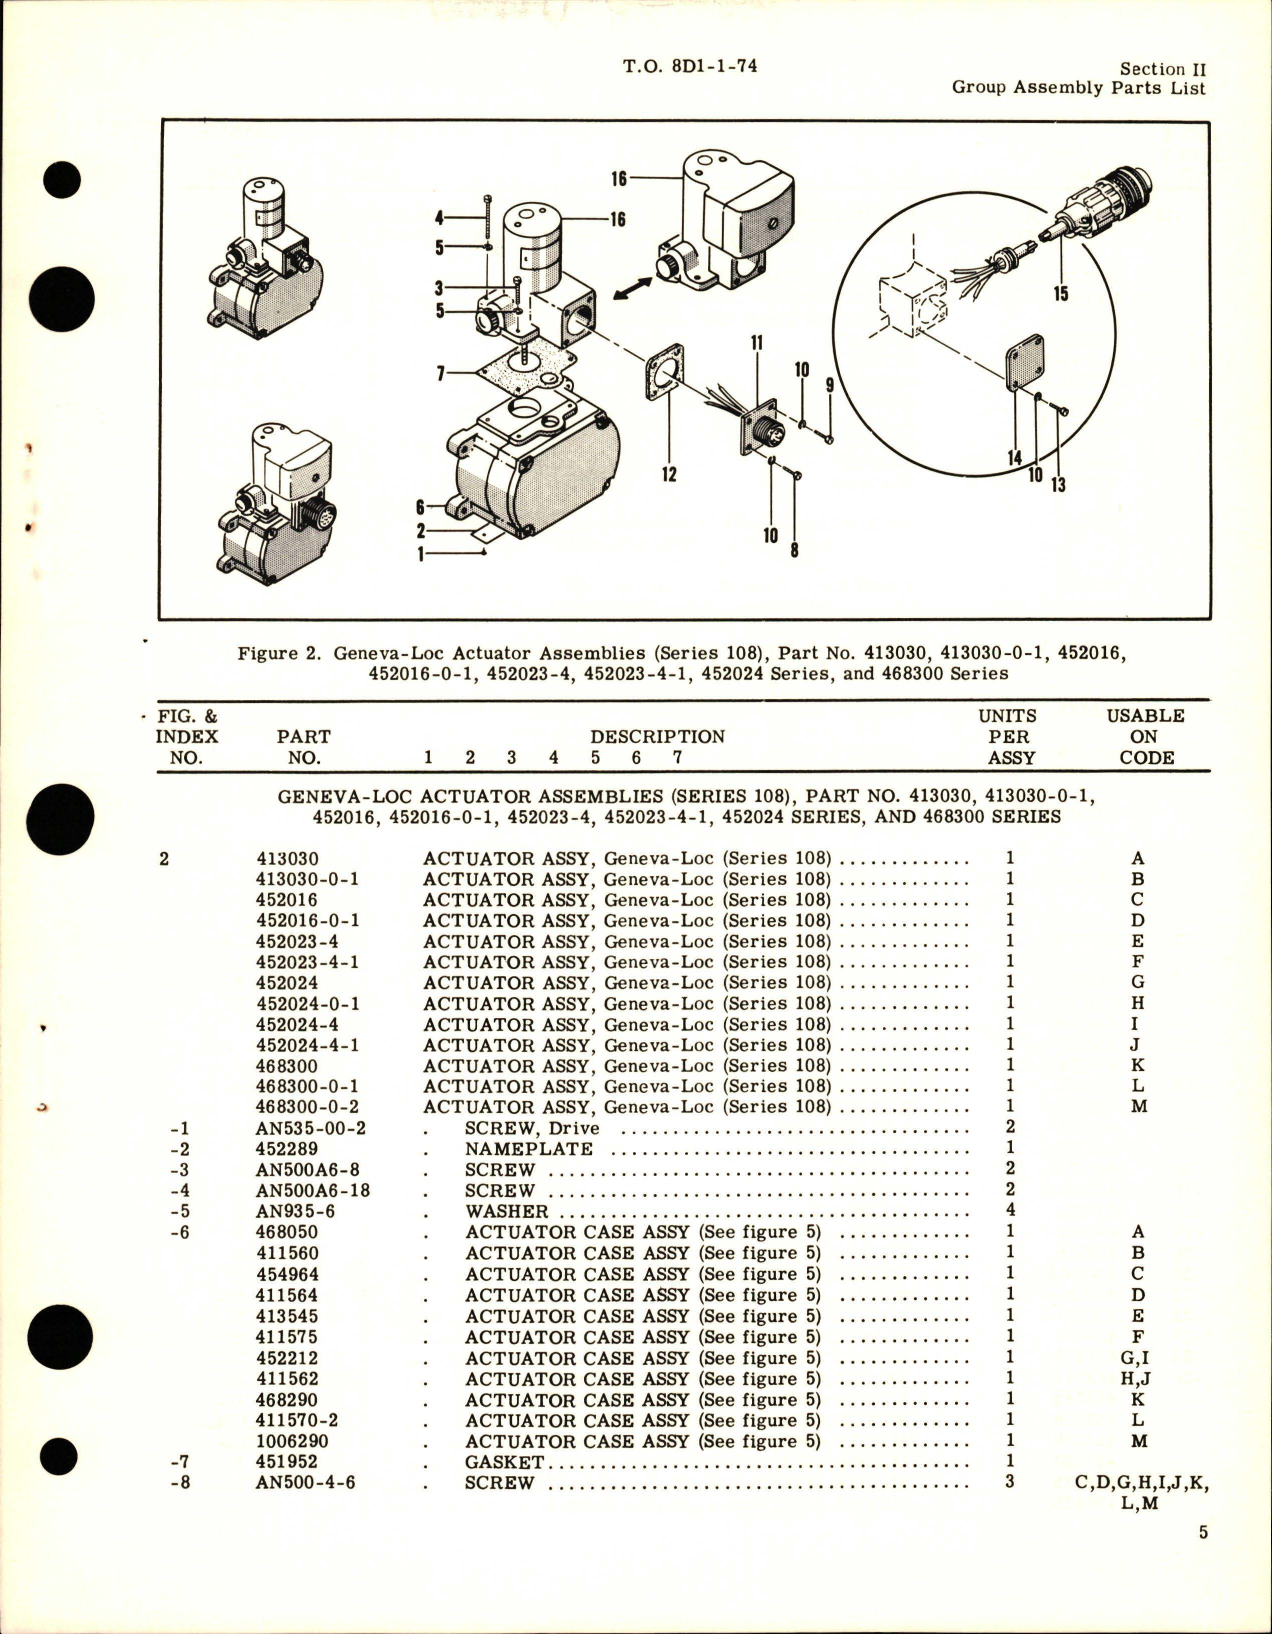 Sample page 7 from AirCorps Library document: Illustrated Parts Breakdown for Geneva-Loc Actuators - Series 108